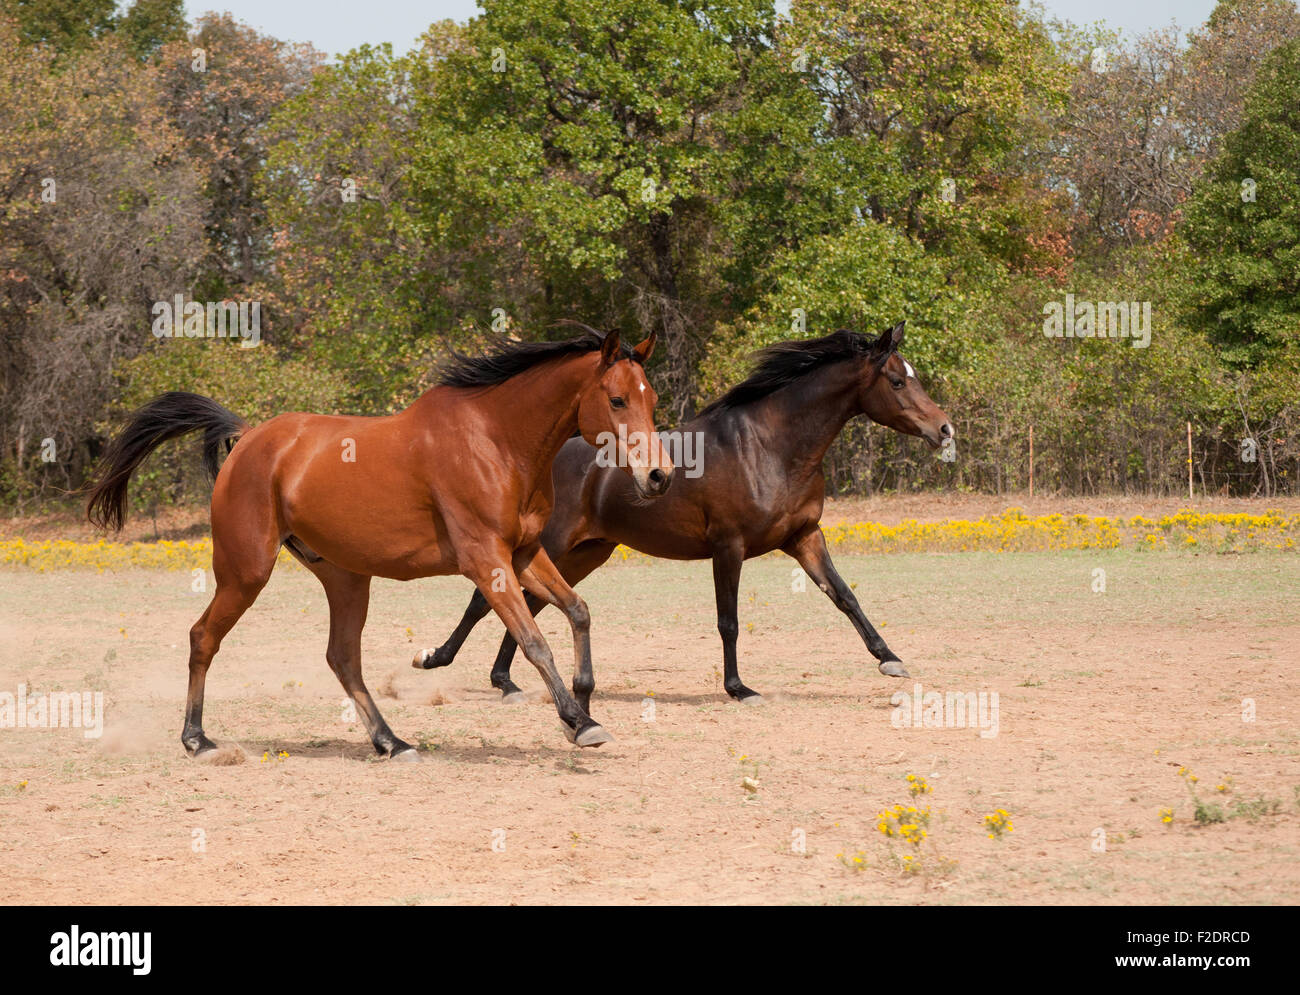 Two horses racing in the pasture, running full speed Stock Photo